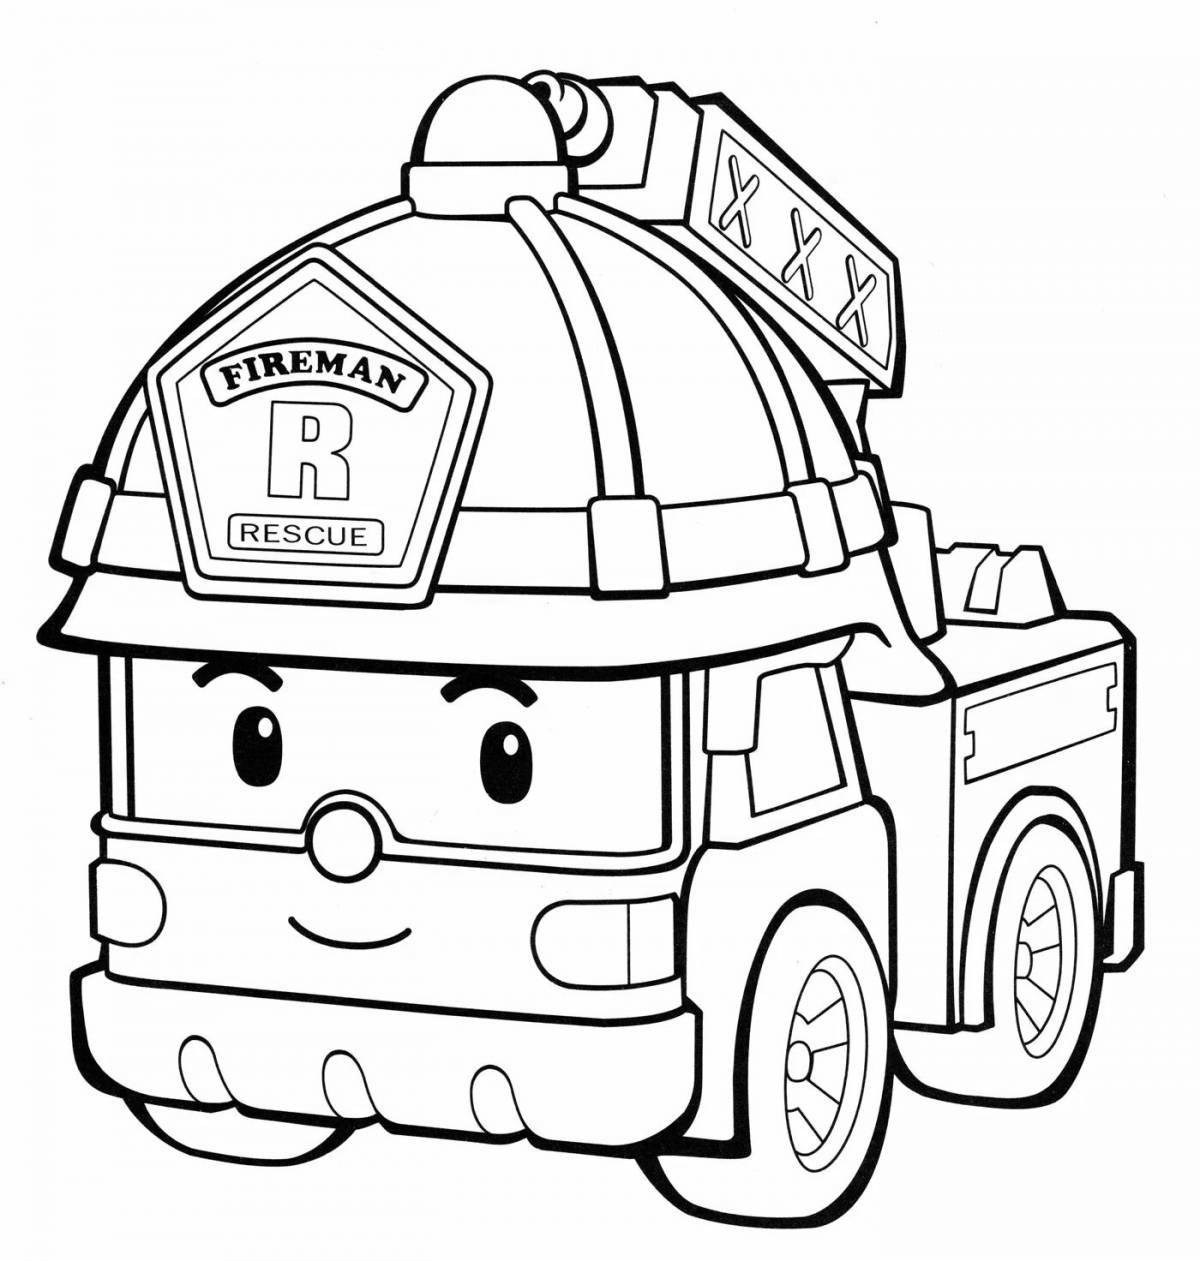 Attractive poly robocar fire truck coloring book